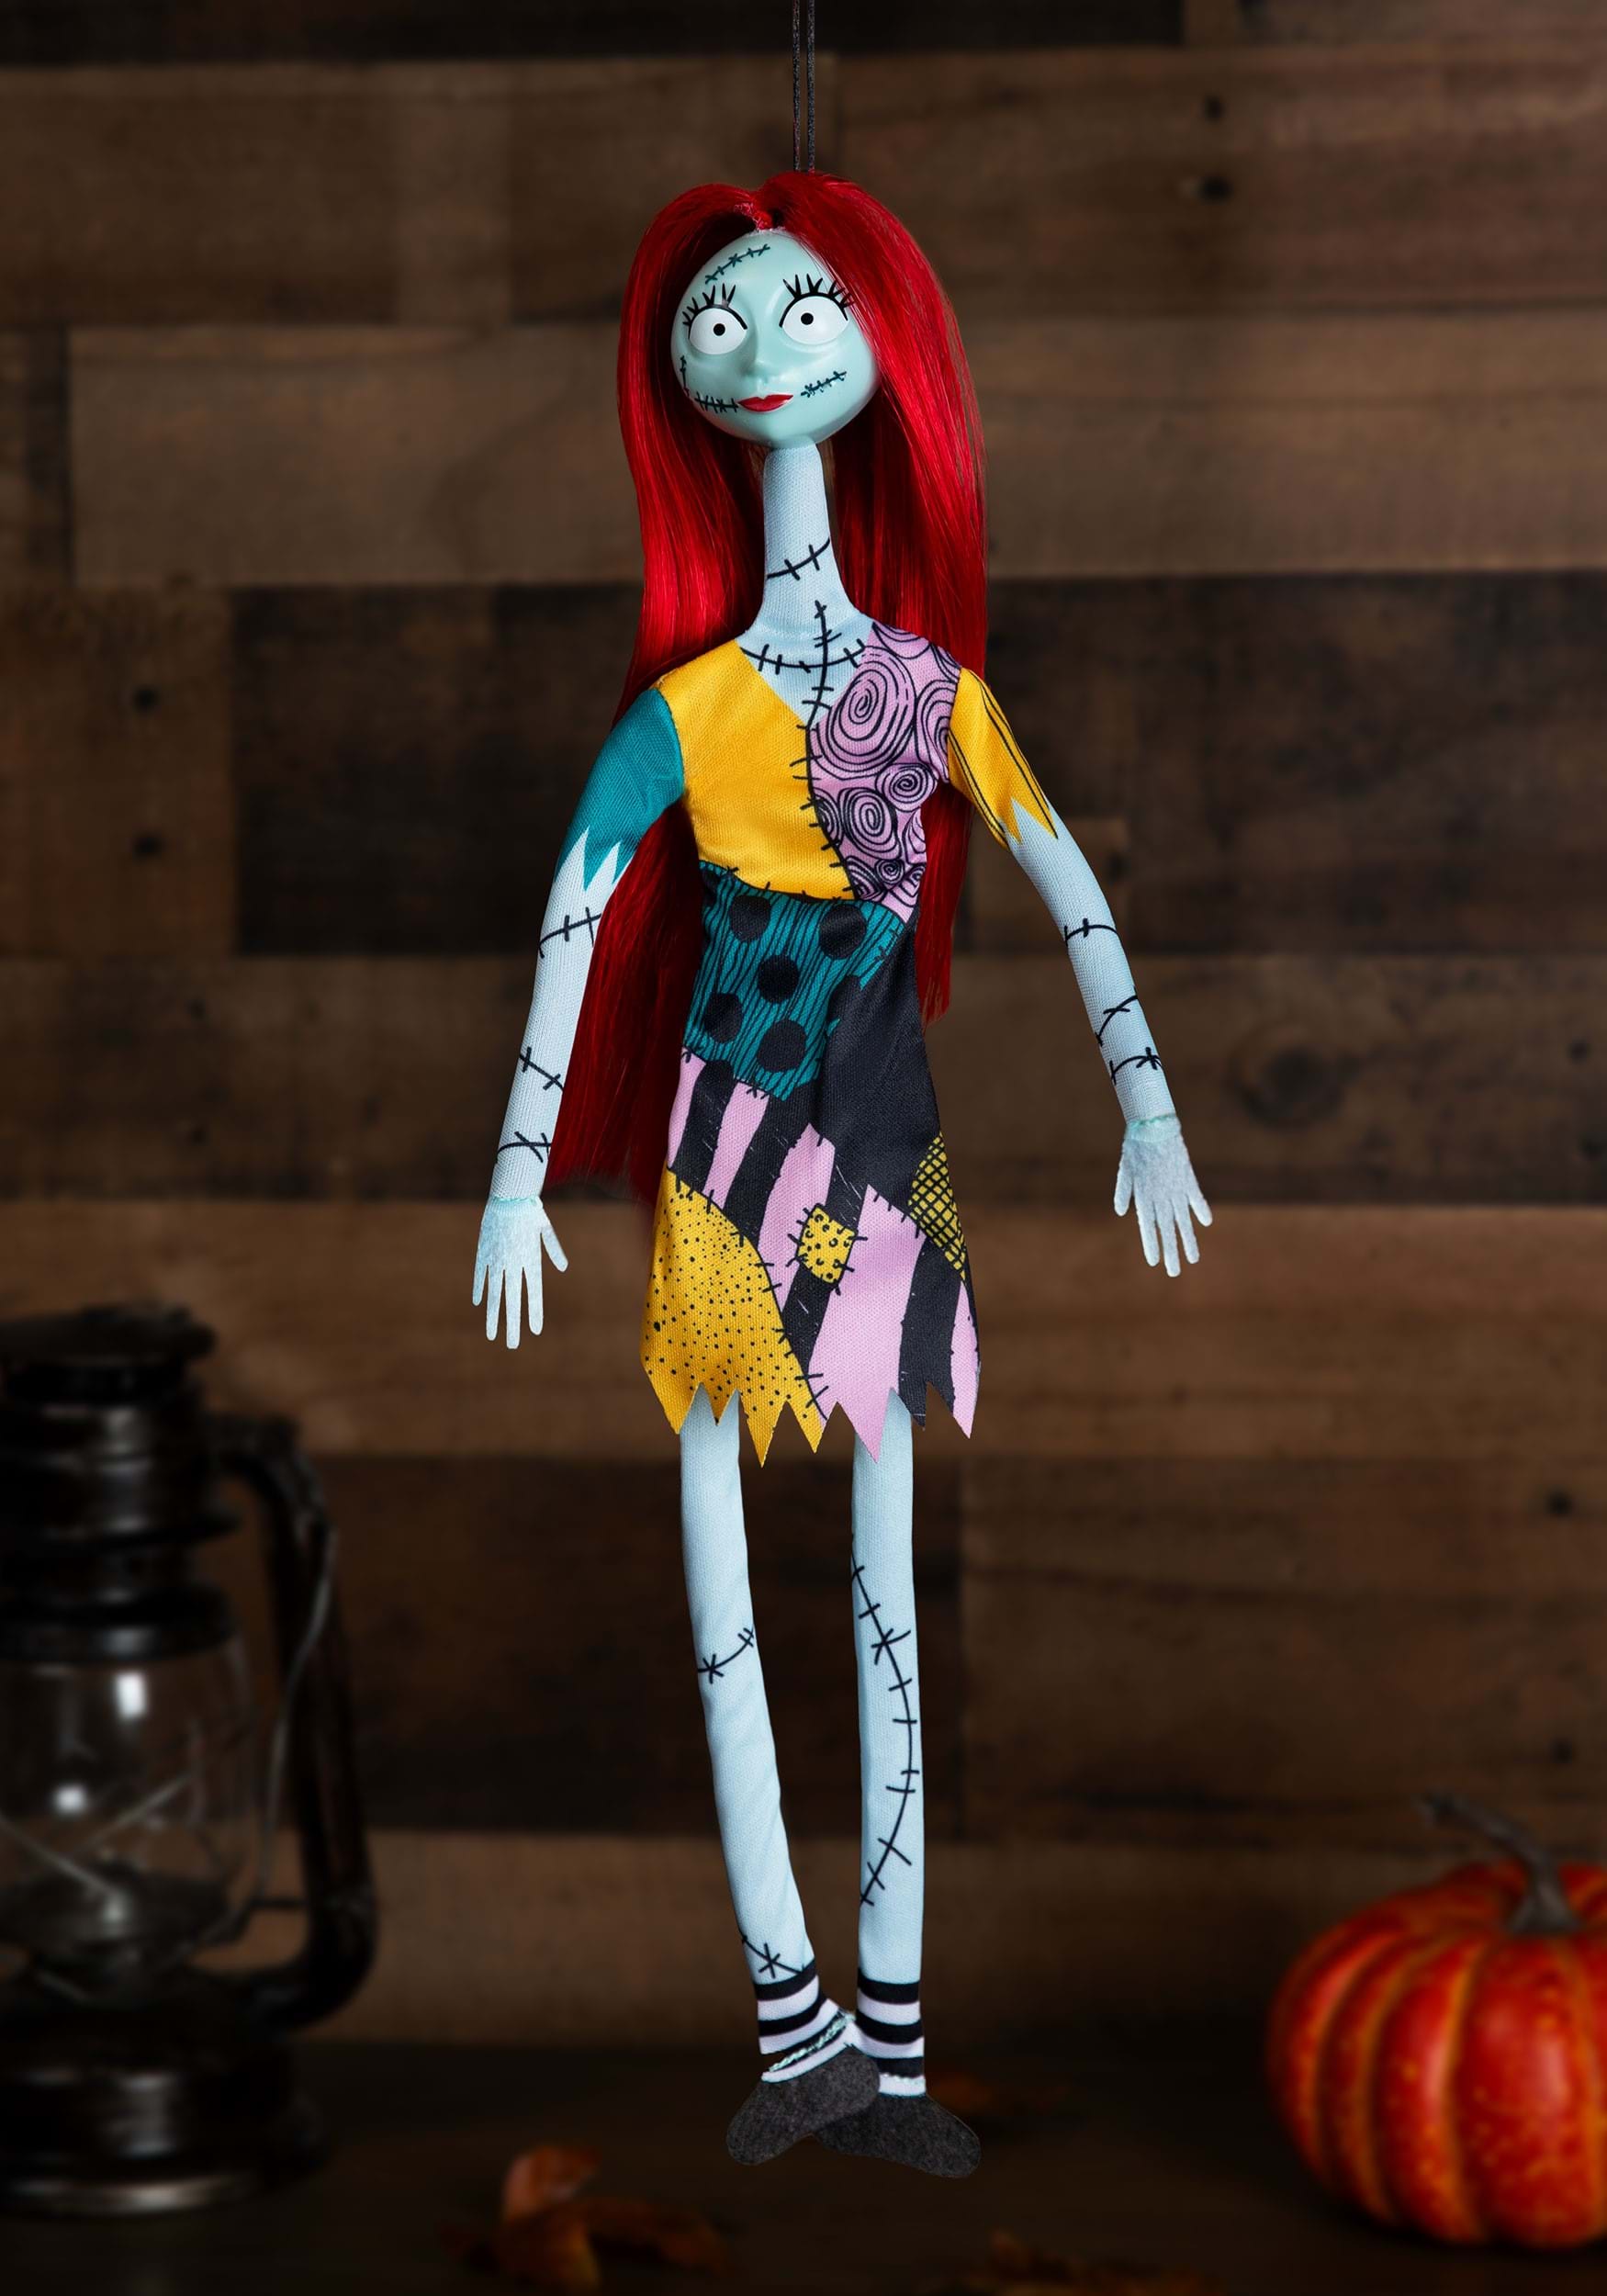 https://images.halloweencostumes.com/products/93382/1-1/nightmare-before-christmas-16-inch-hanging-poseable-sally.jpg